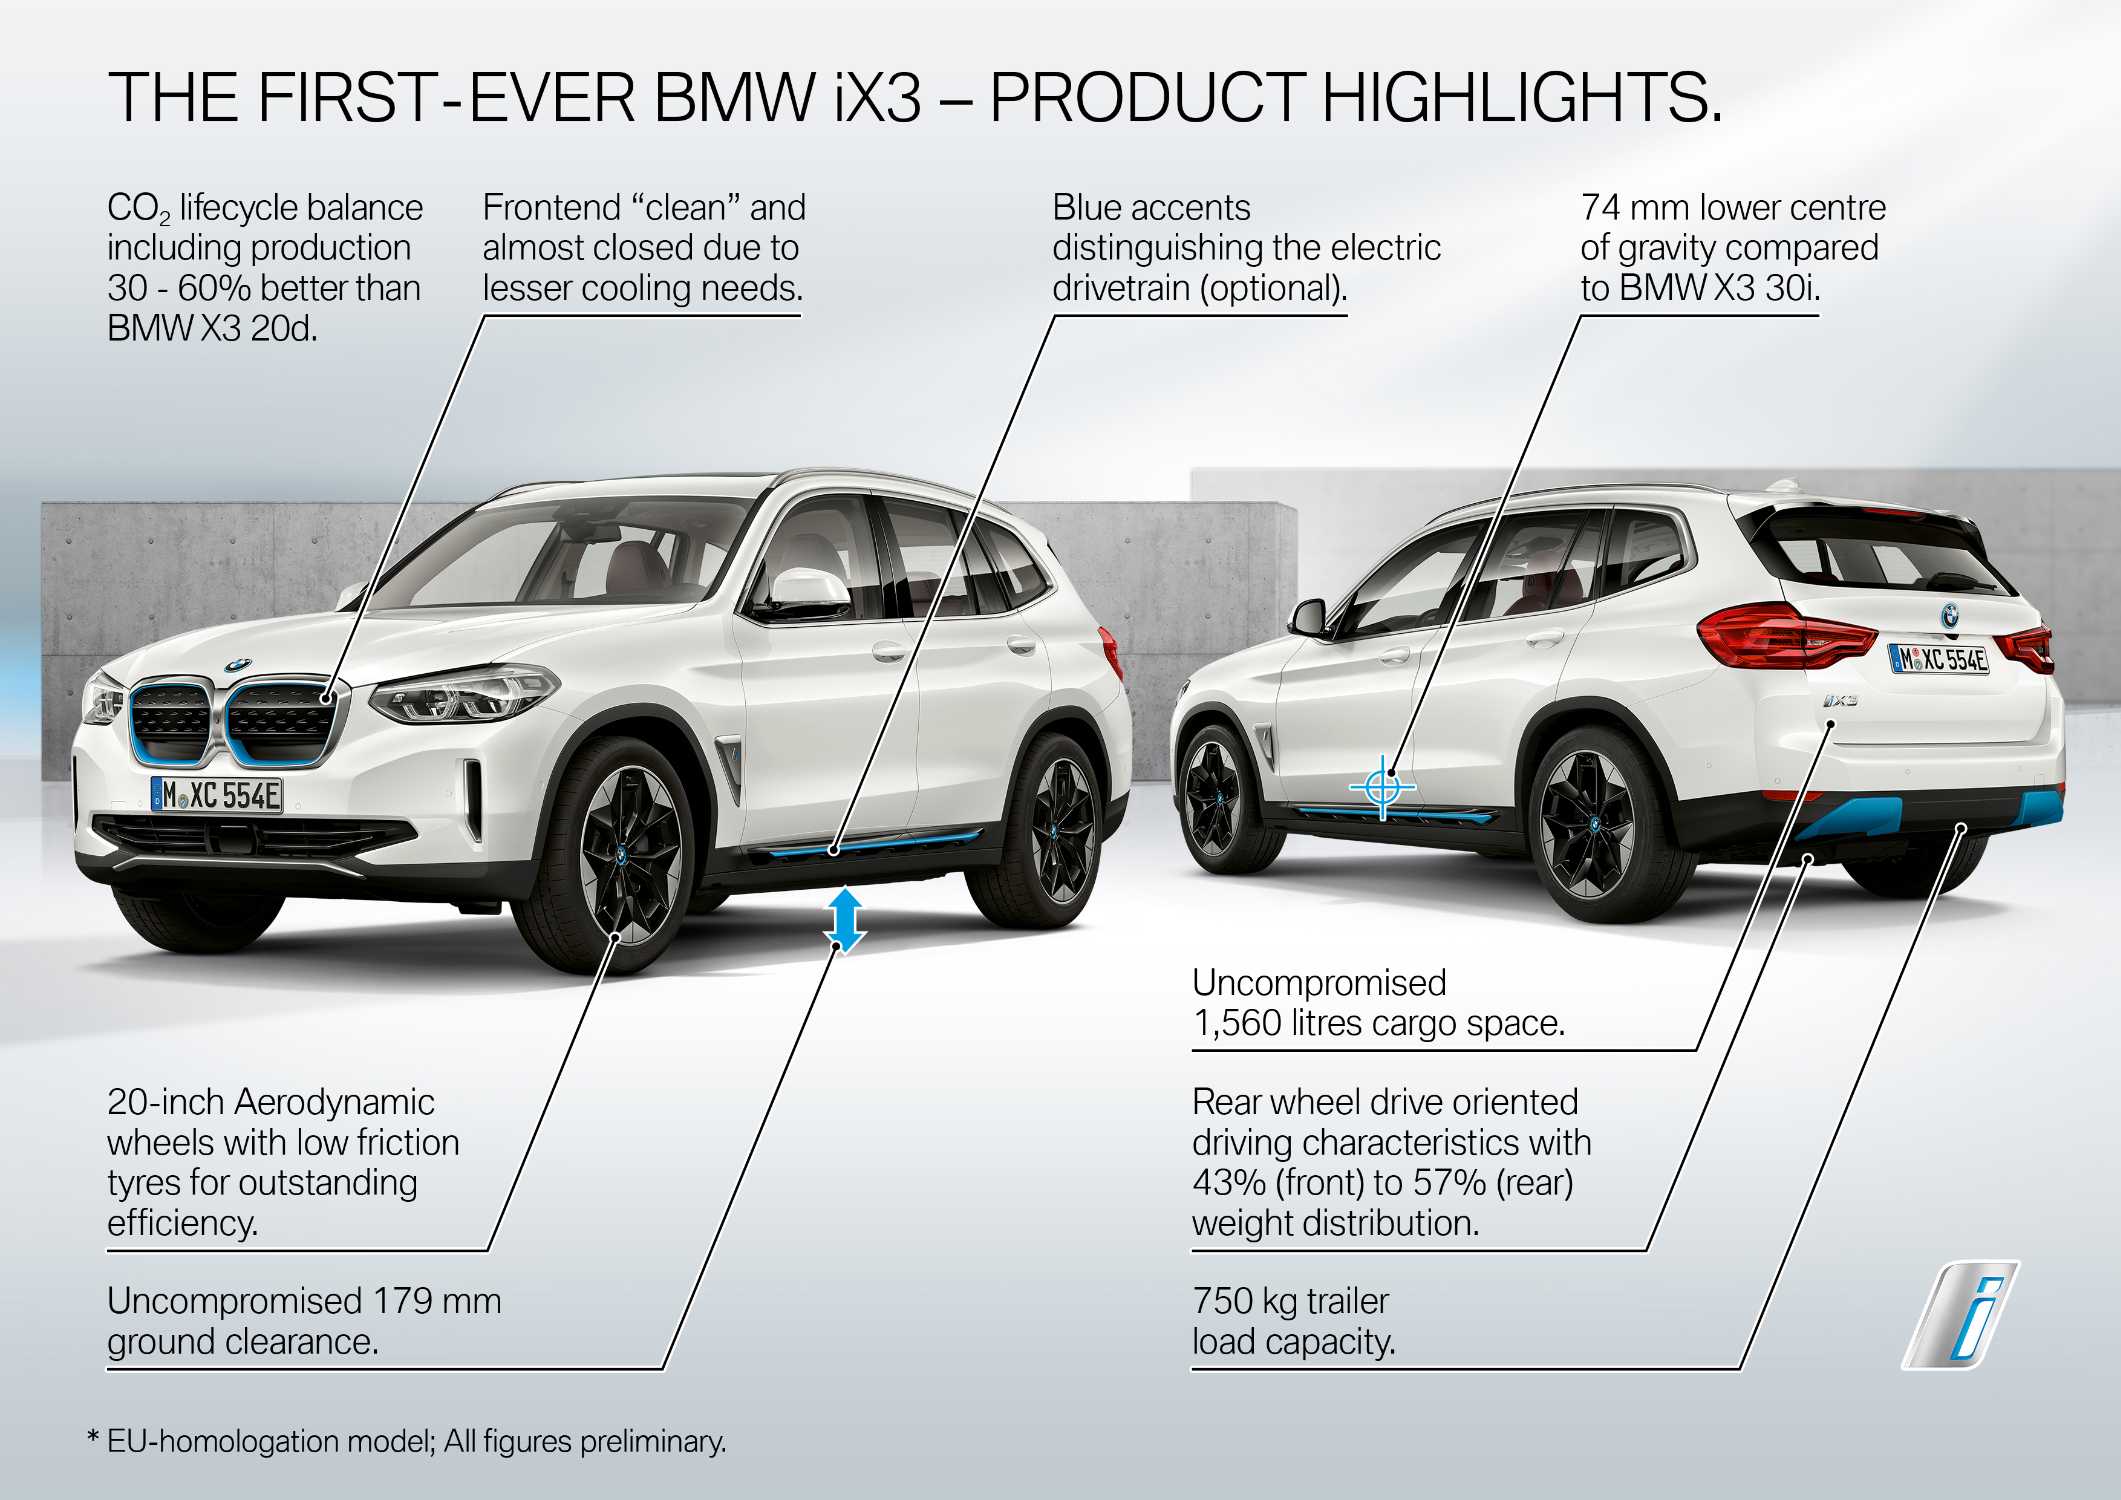 The first-ever BMW iX3 (7/2020)